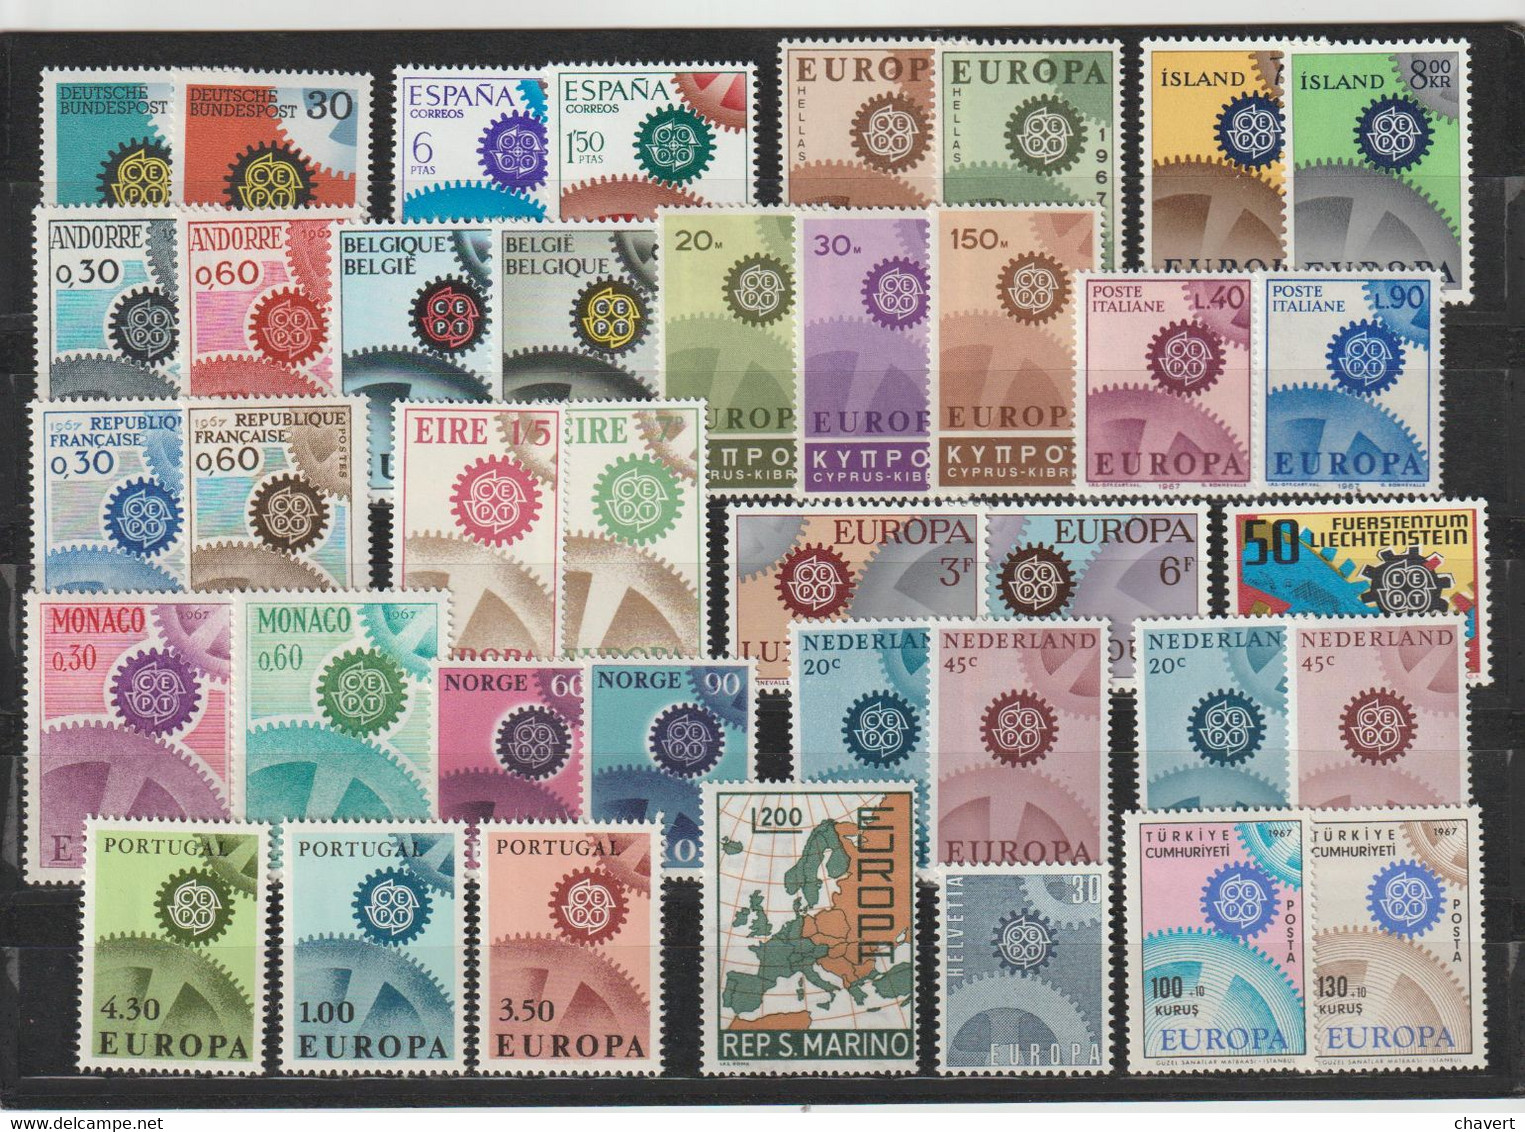 EUROPA - Année 1967 Complet Neuf**(39 Timbres) - Full Years